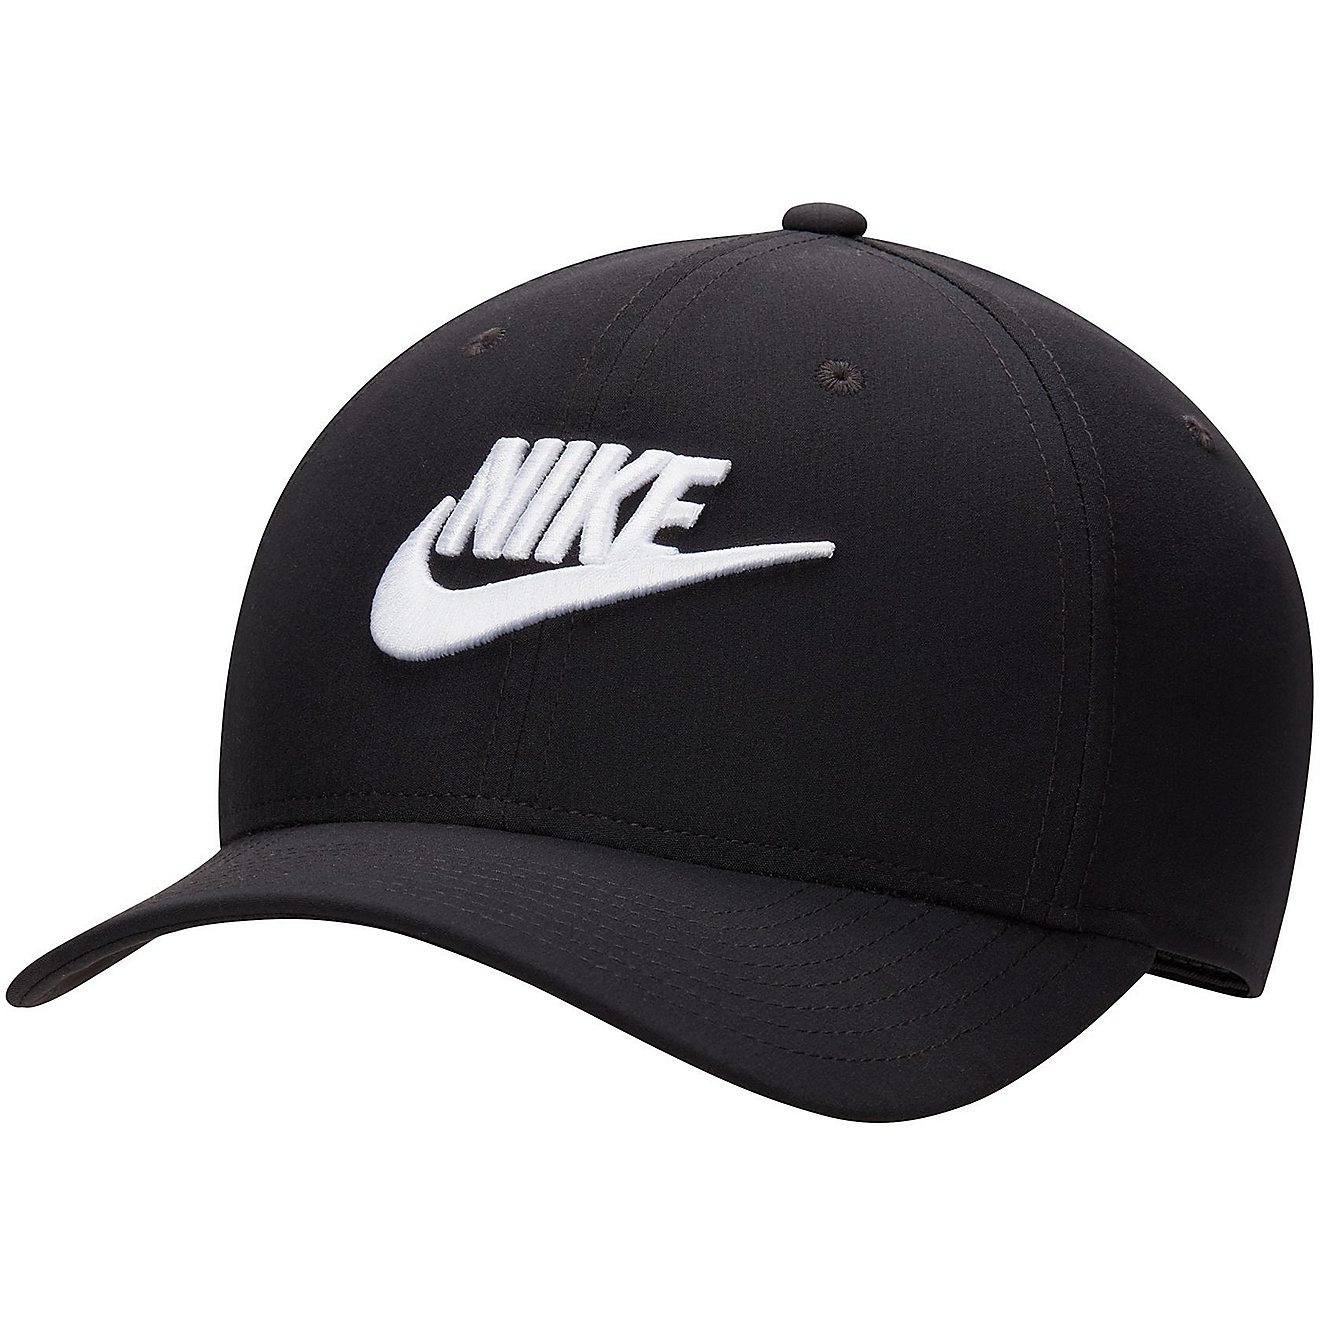 Nike Men's Rise Stretch Fit Futura Cap | Free Shipping at Academy